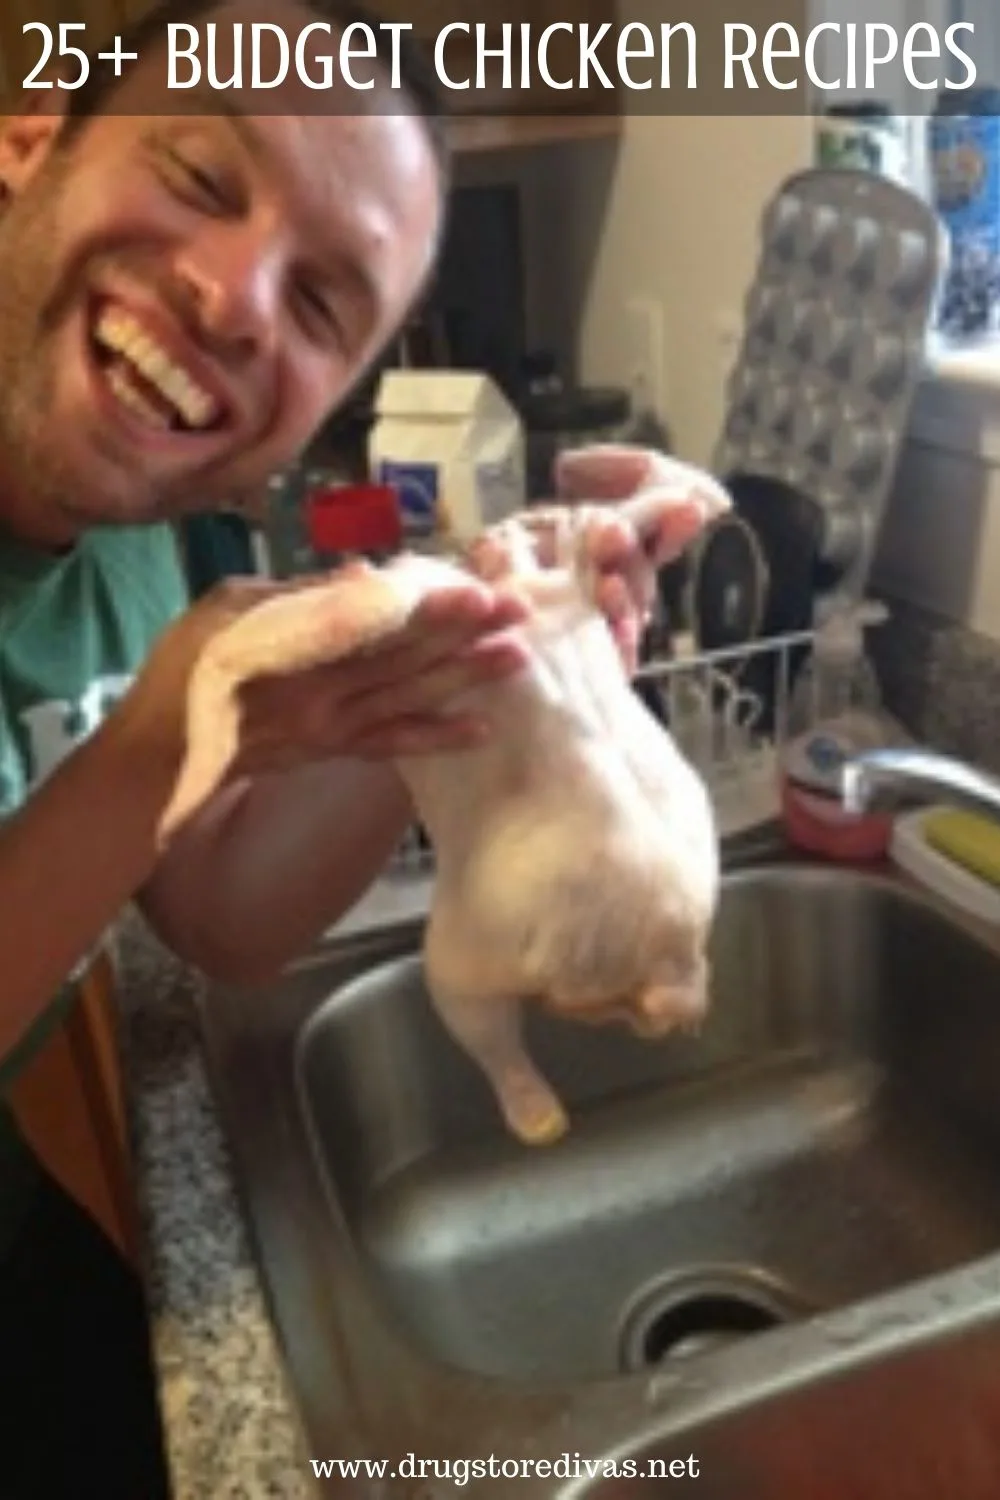 Man holding a whole chicken over a sink with the words 